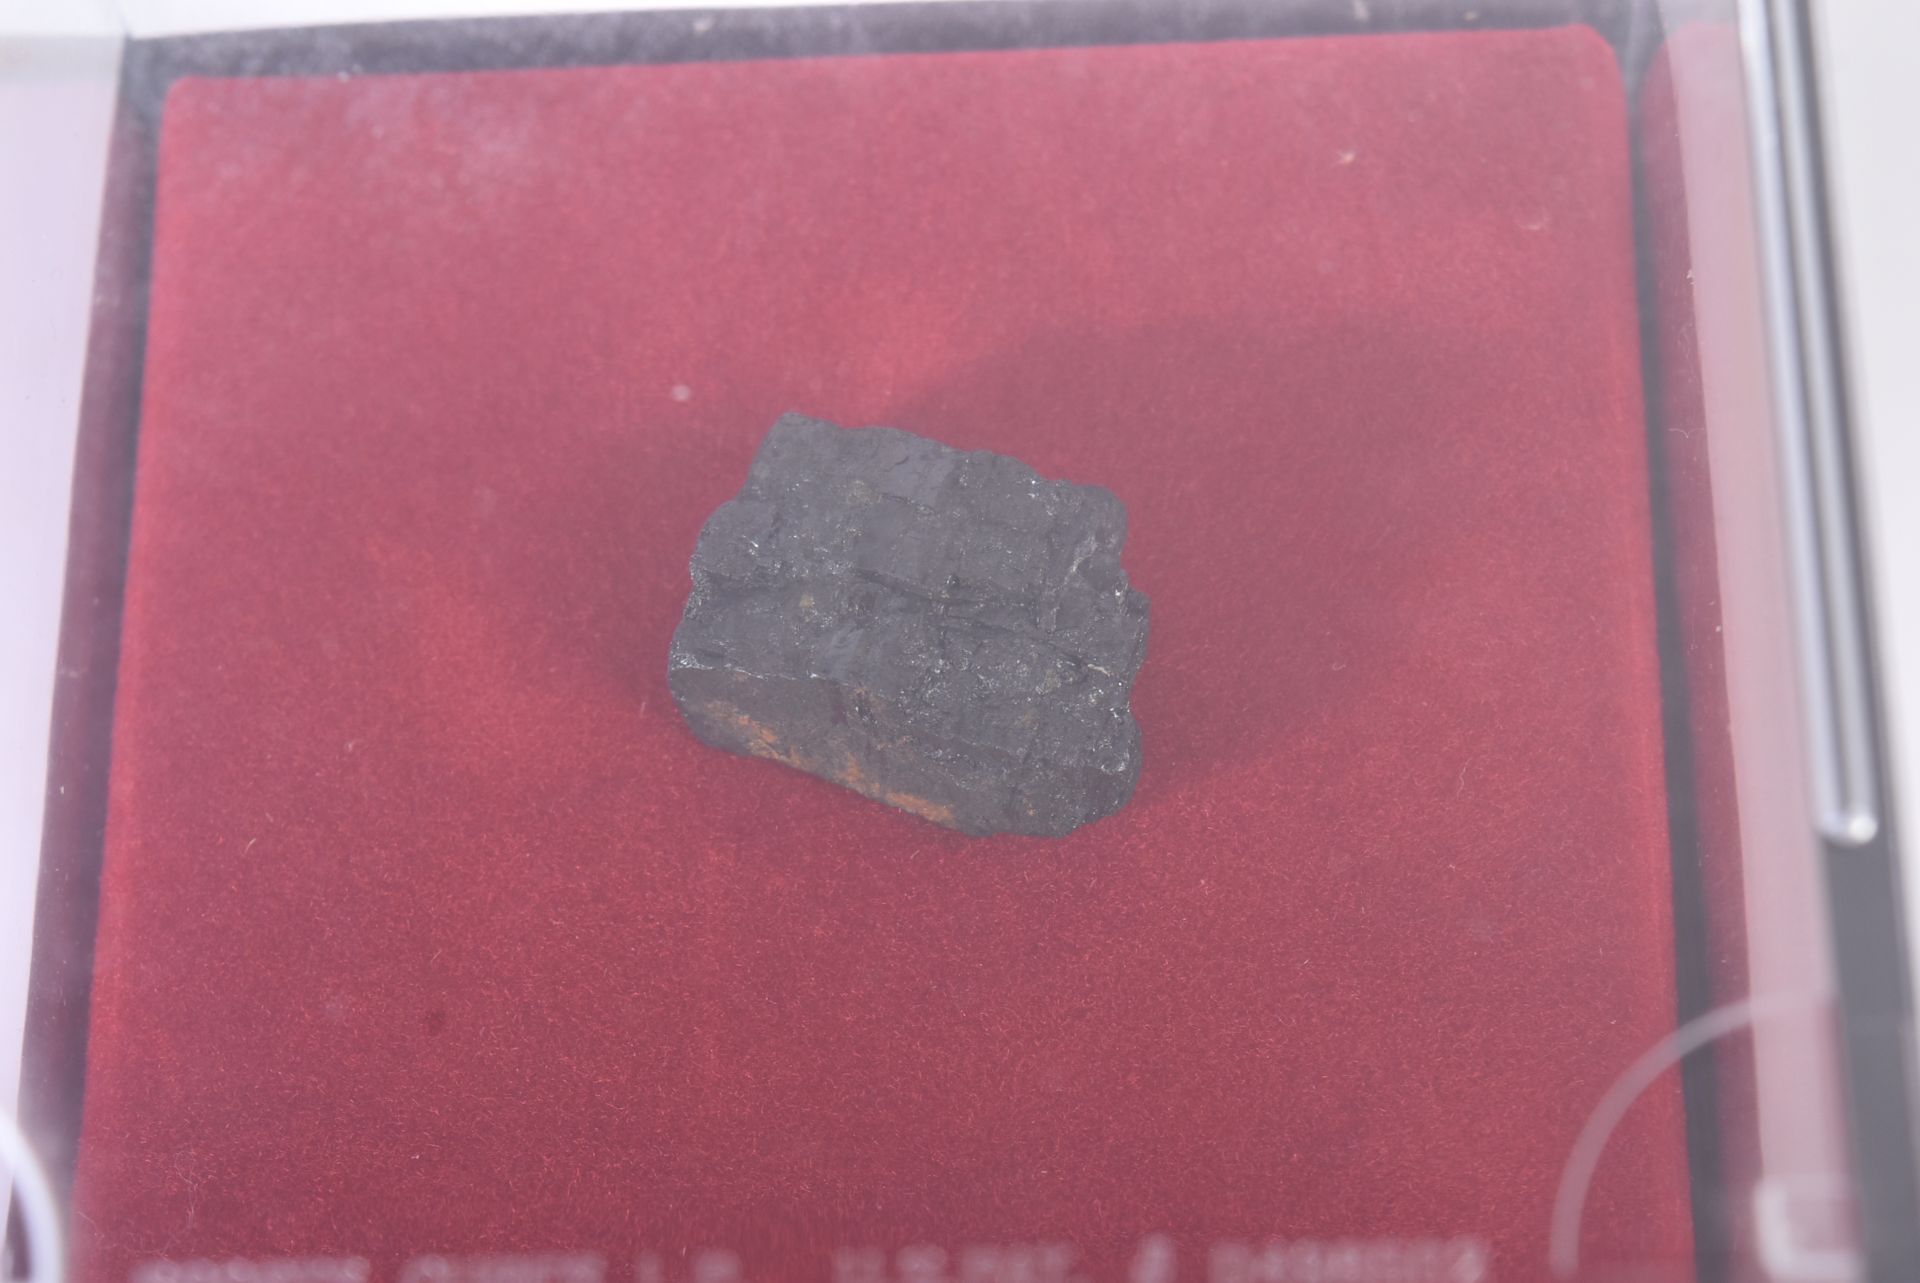 RMS TITANIC - PIECE OF COAL FROM THE WRECKAGE - Image 2 of 5